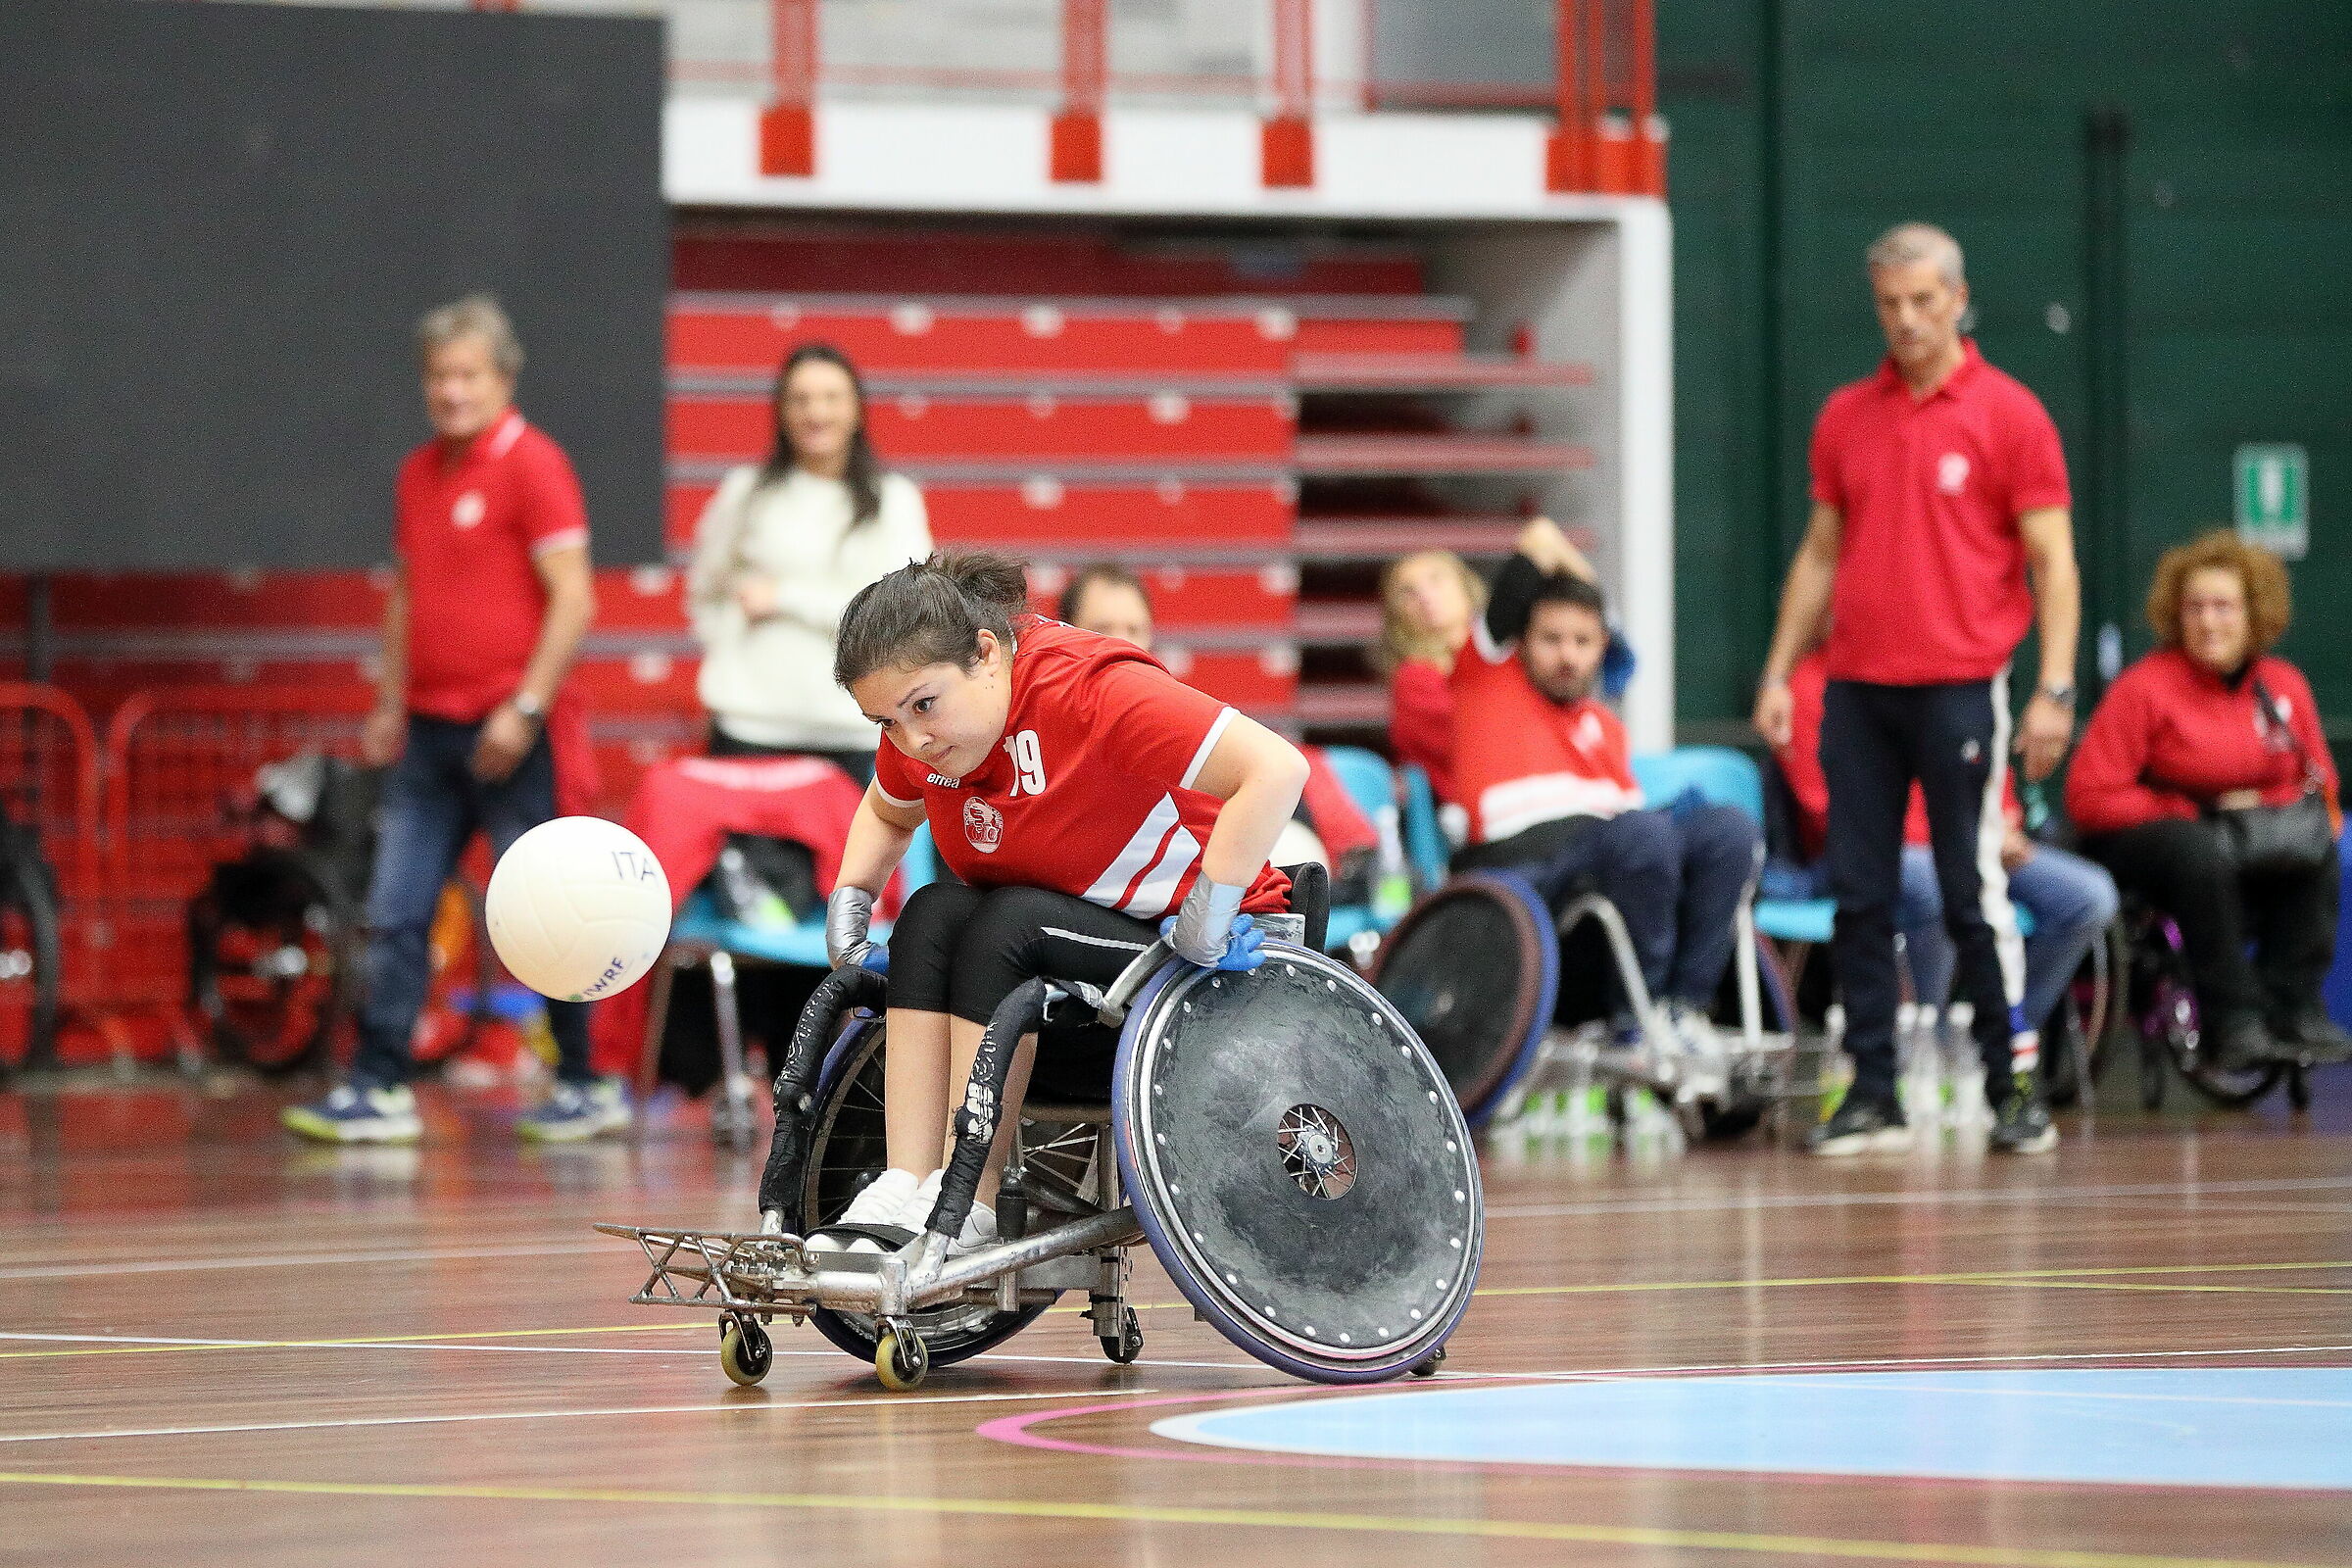 Wheelchair Rugby 2022 - 1st-2nd Place Final...